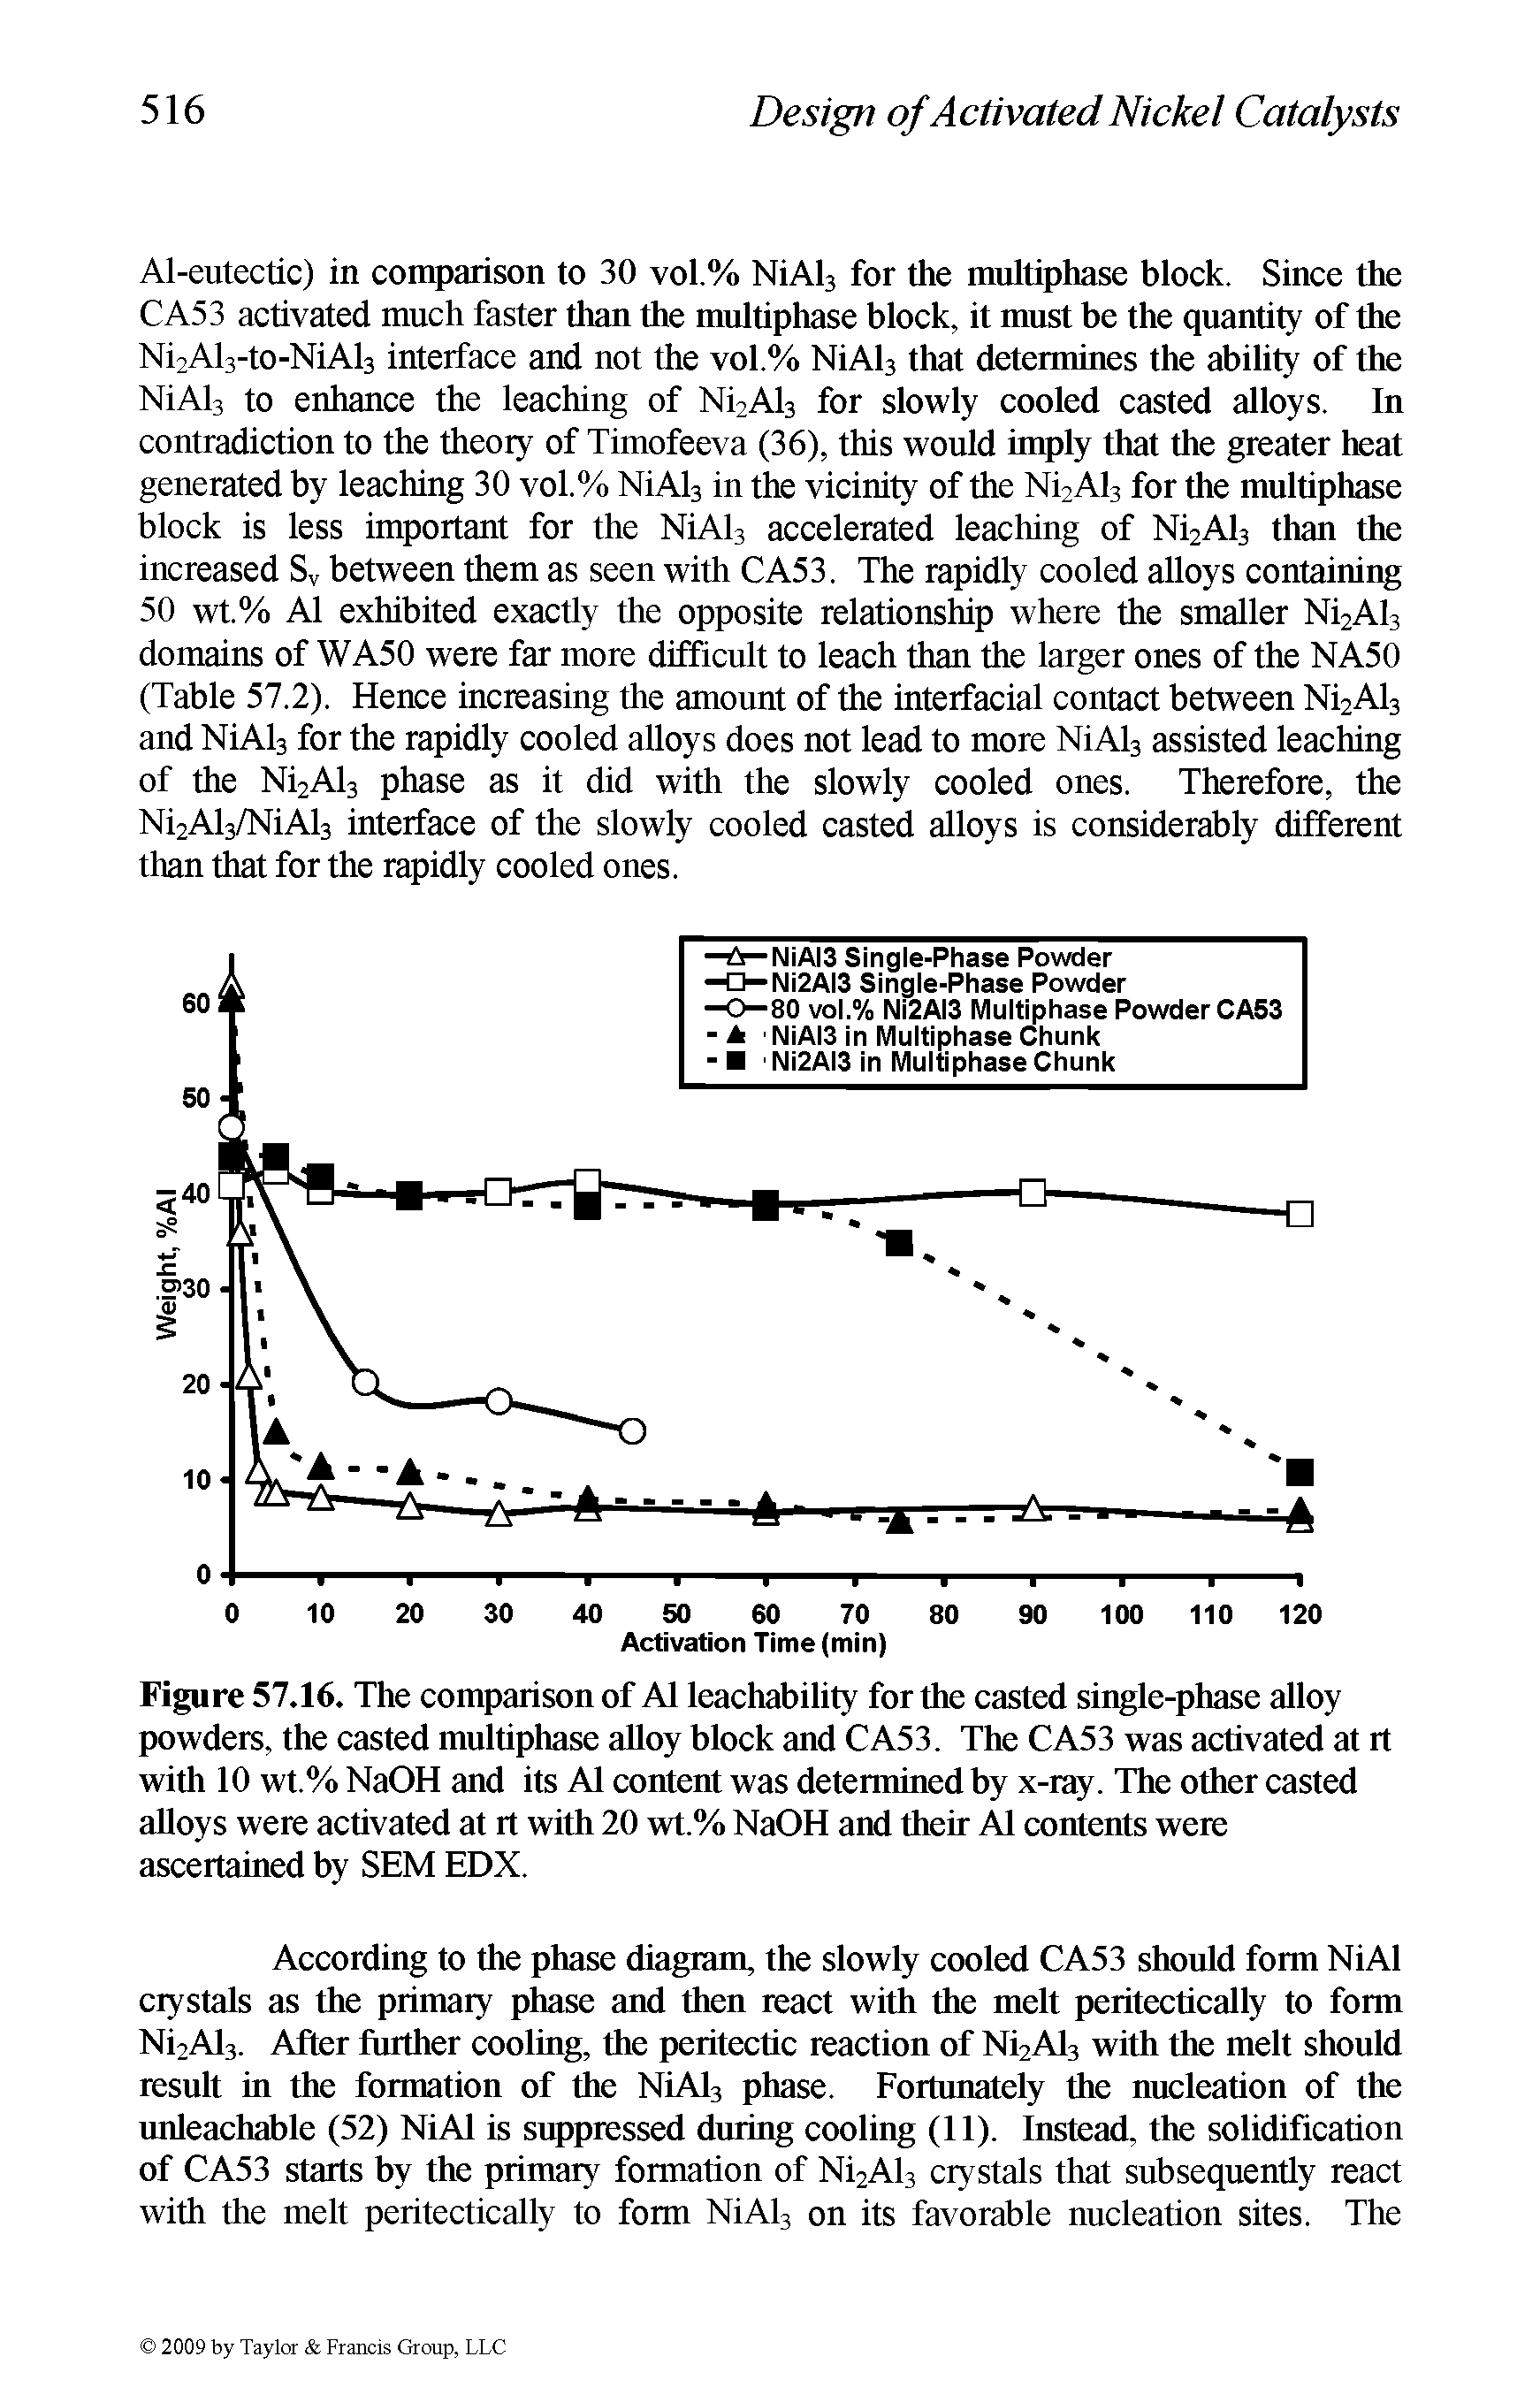 Figure 57.16. The comparison of A1 leachability for the casted single-phase alloy powders, the casted multiphase alloy block and CA53. The CA53 was activated at it with 10 wt.% NaOH and its A1 content was determined by x-ray. The other casted alloys were activated at it with 20 wt.% NaOH and their A1 contents were ascertained by SEM EDX.